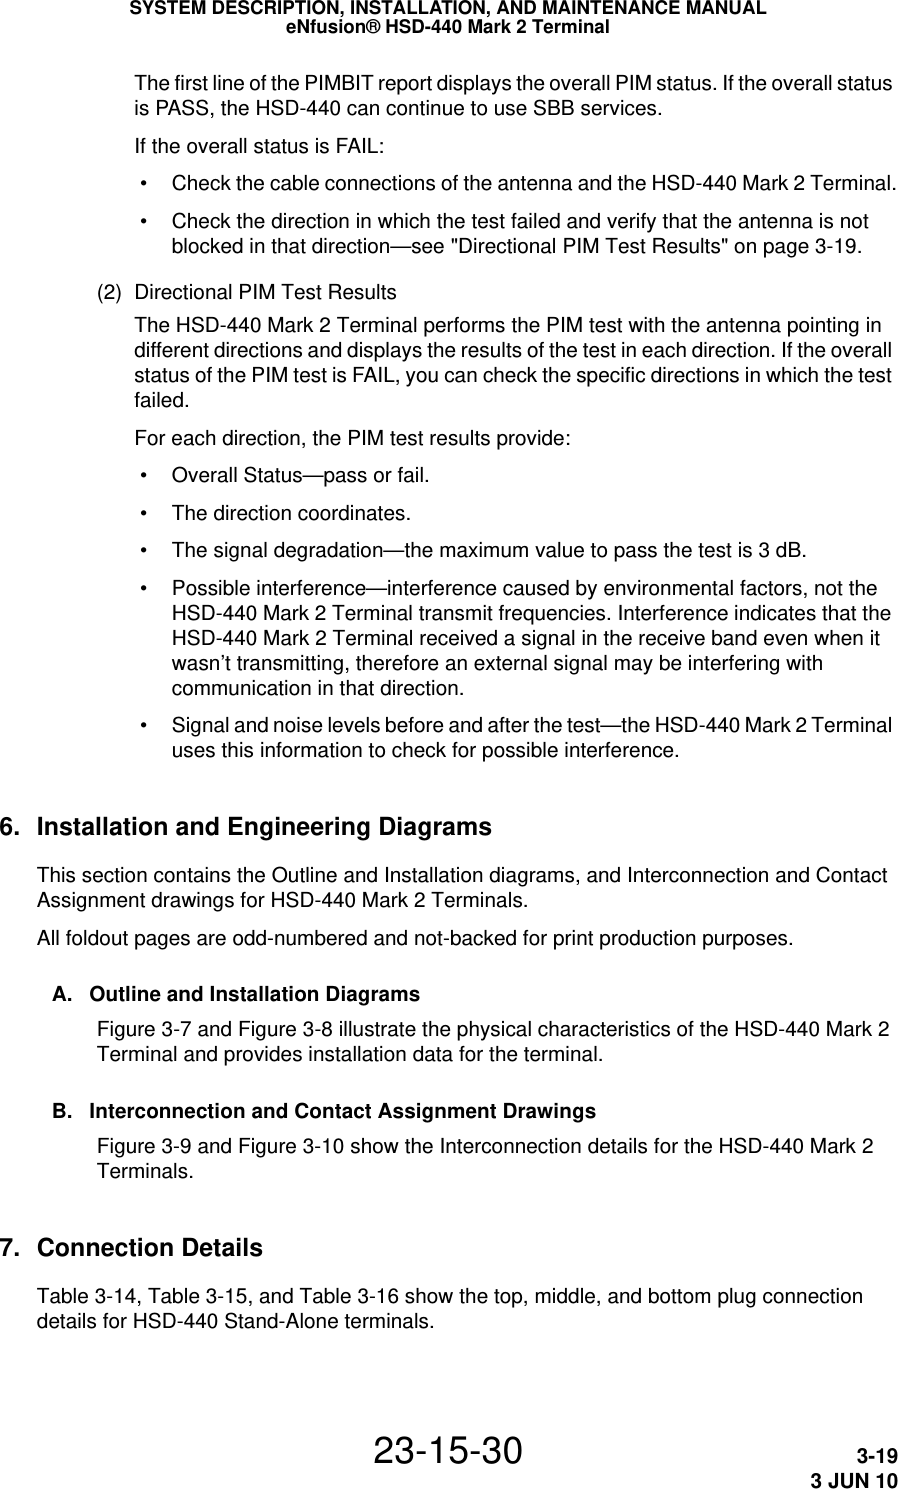 SYSTEM DESCRIPTION, INSTALLATION, AND MAINTENANCE MANUALeNfusion® HSD-440 Mark 2 Terminal23-15-30 3-193 JUN 10The first line of the PIMBIT report displays the overall PIM status. If the overall status is PASS, the HSD-440 can continue to use SBB services.If the overall status is FAIL: • Check the cable connections of the antenna and the HSD-440 Mark 2 Terminal. • Check the direction in which the test failed and verify that the antenna is not blocked in that direction—see &quot;Directional PIM Test Results&quot; on page 3-19.(2) Directional PIM Test ResultsThe HSD-440 Mark 2 Terminal performs the PIM test with the antenna pointing in different directions and displays the results of the test in each direction. If the overall status of the PIM test is FAIL, you can check the specific directions in which the test failed.For each direction, the PIM test results provide: • Overall Status—pass or fail. • The direction coordinates. • The signal degradation—the maximum value to pass the test is 3 dB. • Possible interference—interference caused by environmental factors, not the HSD-440 Mark 2 Terminal transmit frequencies. Interference indicates that the HSD-440 Mark 2 Terminal received a signal in the receive band even when it wasn’t transmitting, therefore an external signal may be interfering with communication in that direction. • Signal and noise levels before and after the test—the HSD-440 Mark 2 Terminal uses this information to check for possible interference.6. Installation and Engineering DiagramsThis section contains the Outline and Installation diagrams, and Interconnection and Contact Assignment drawings for HSD-440 Mark 2 Terminals.All foldout pages are odd-numbered and not-backed for print production purposes.A. Outline and Installation DiagramsFigure 3-7 and Figure 3-8 illustrate the physical characteristics of the HSD-440 Mark 2 Terminal and provides installation data for the terminal.B. Interconnection and Contact Assignment DrawingsFigure 3-9 and Figure 3-10 show the Interconnection details for the HSD-440 Mark 2 Terminals.7. Connection DetailsTable 3-14, Table 3-15, and Table 3-16 show the top, middle, and bottom plug connection details for HSD-440 Stand-Alone terminals.